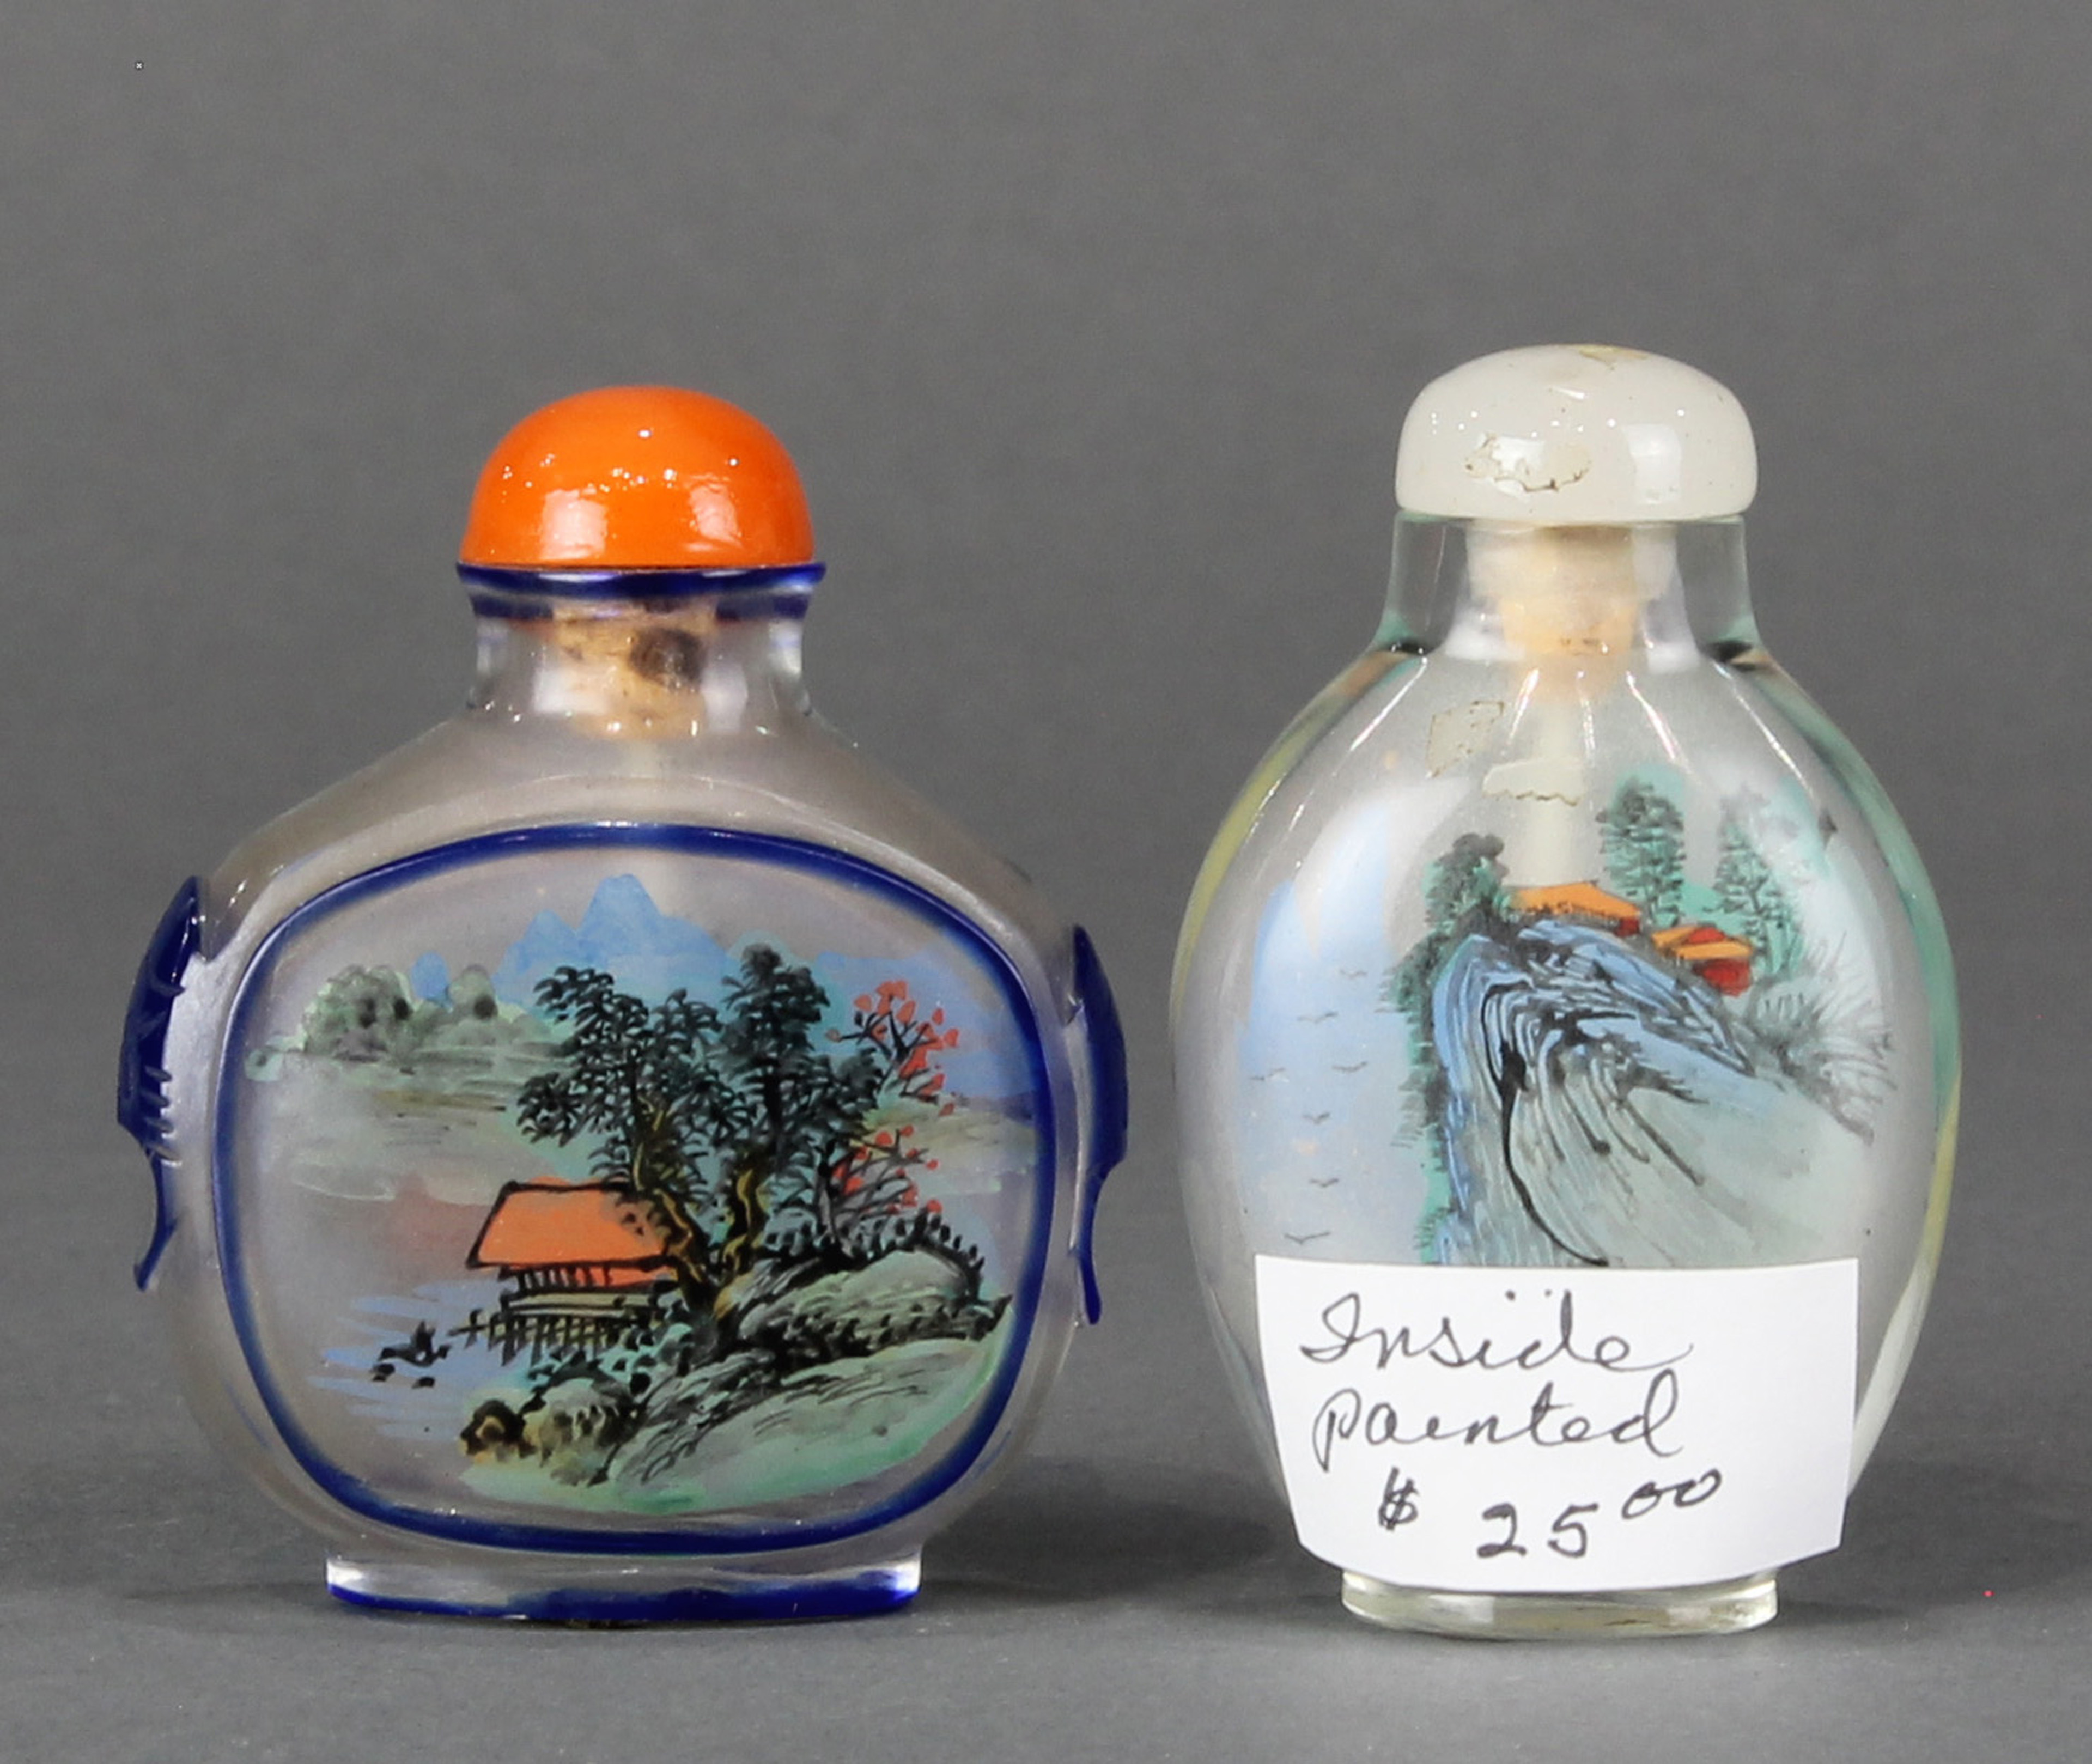 (Lot of 2) Inside Painted Snuff Bottles - Image 4 of 6